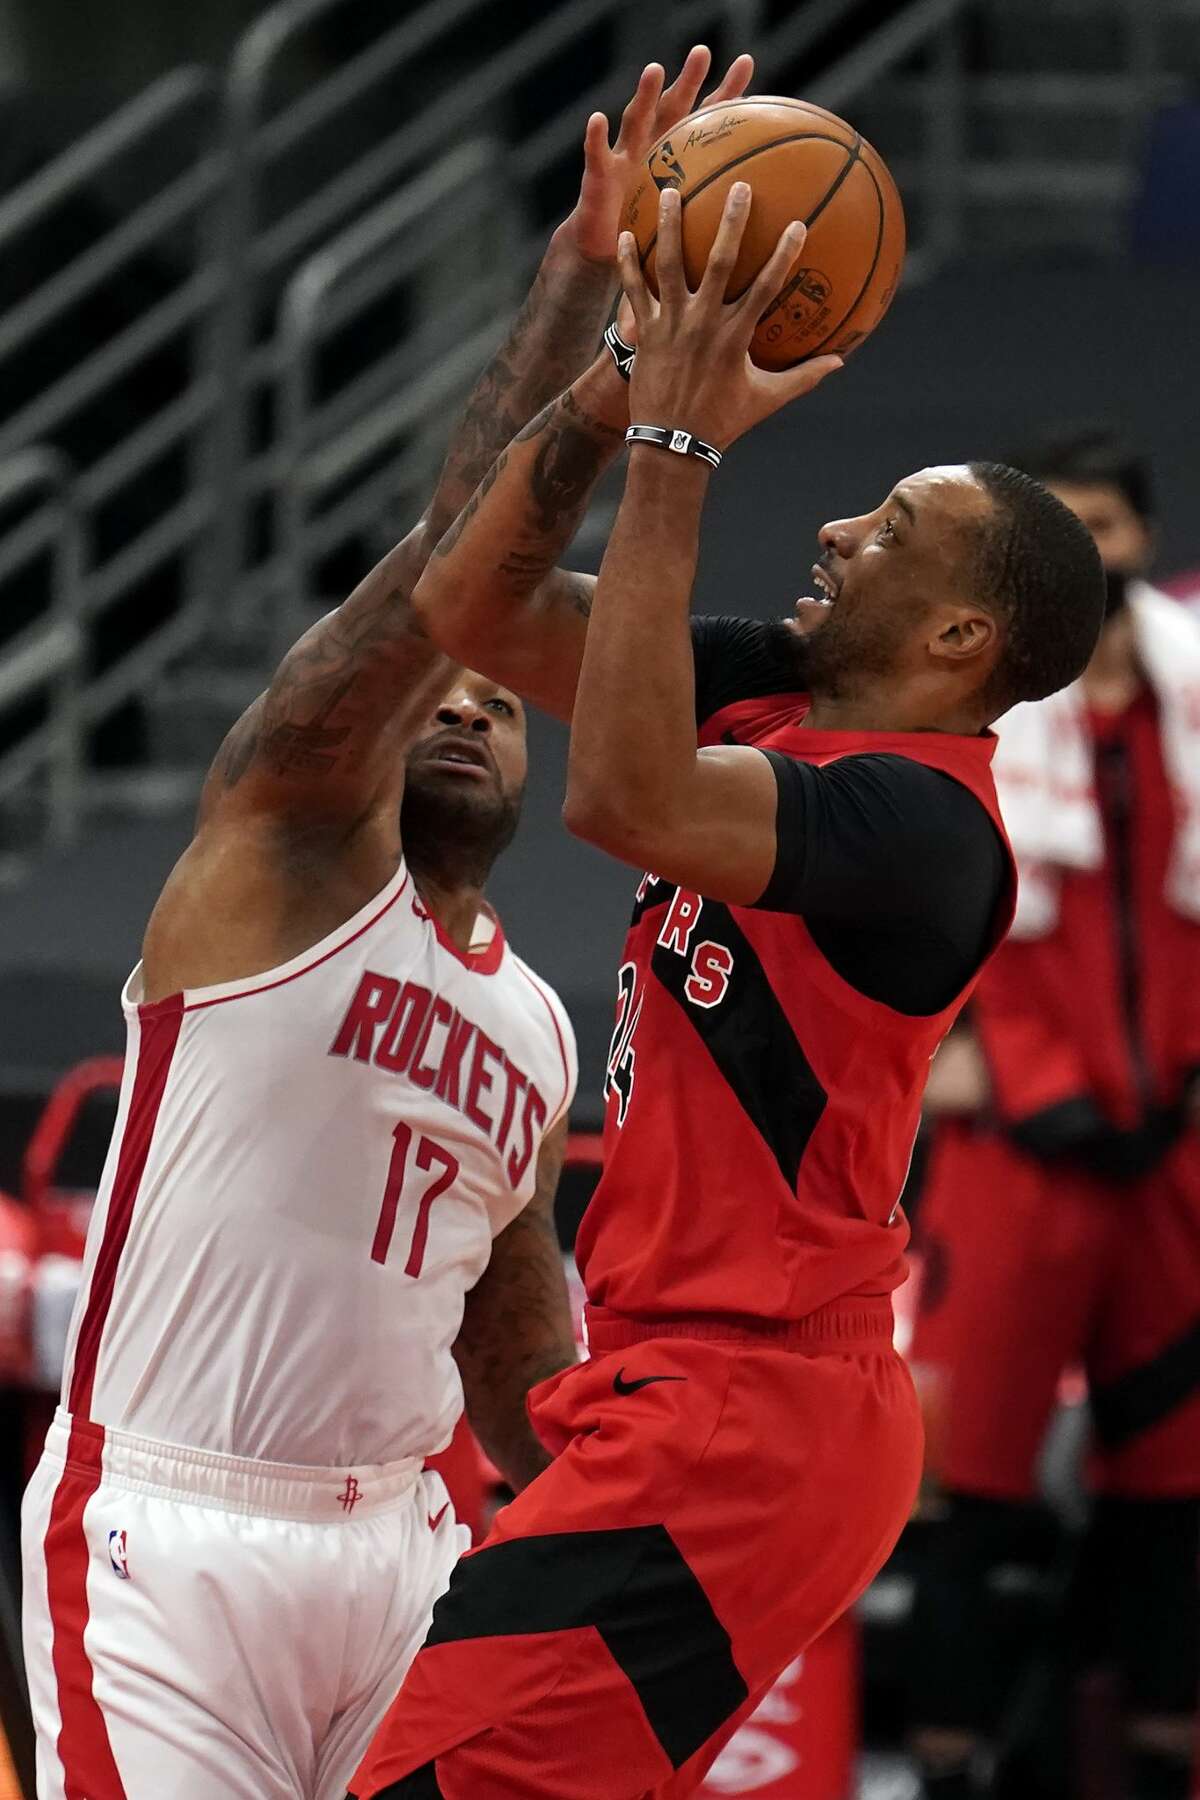 Toronto Raptors guard Norman Powell (24) shoots against Houston Rockets forward P.J. Tucker (17) during the first half of an NBA basketball game Friday, Feb. 26, 2021, in Tampa, Fla. (AP Photo/Chris O'Meara)